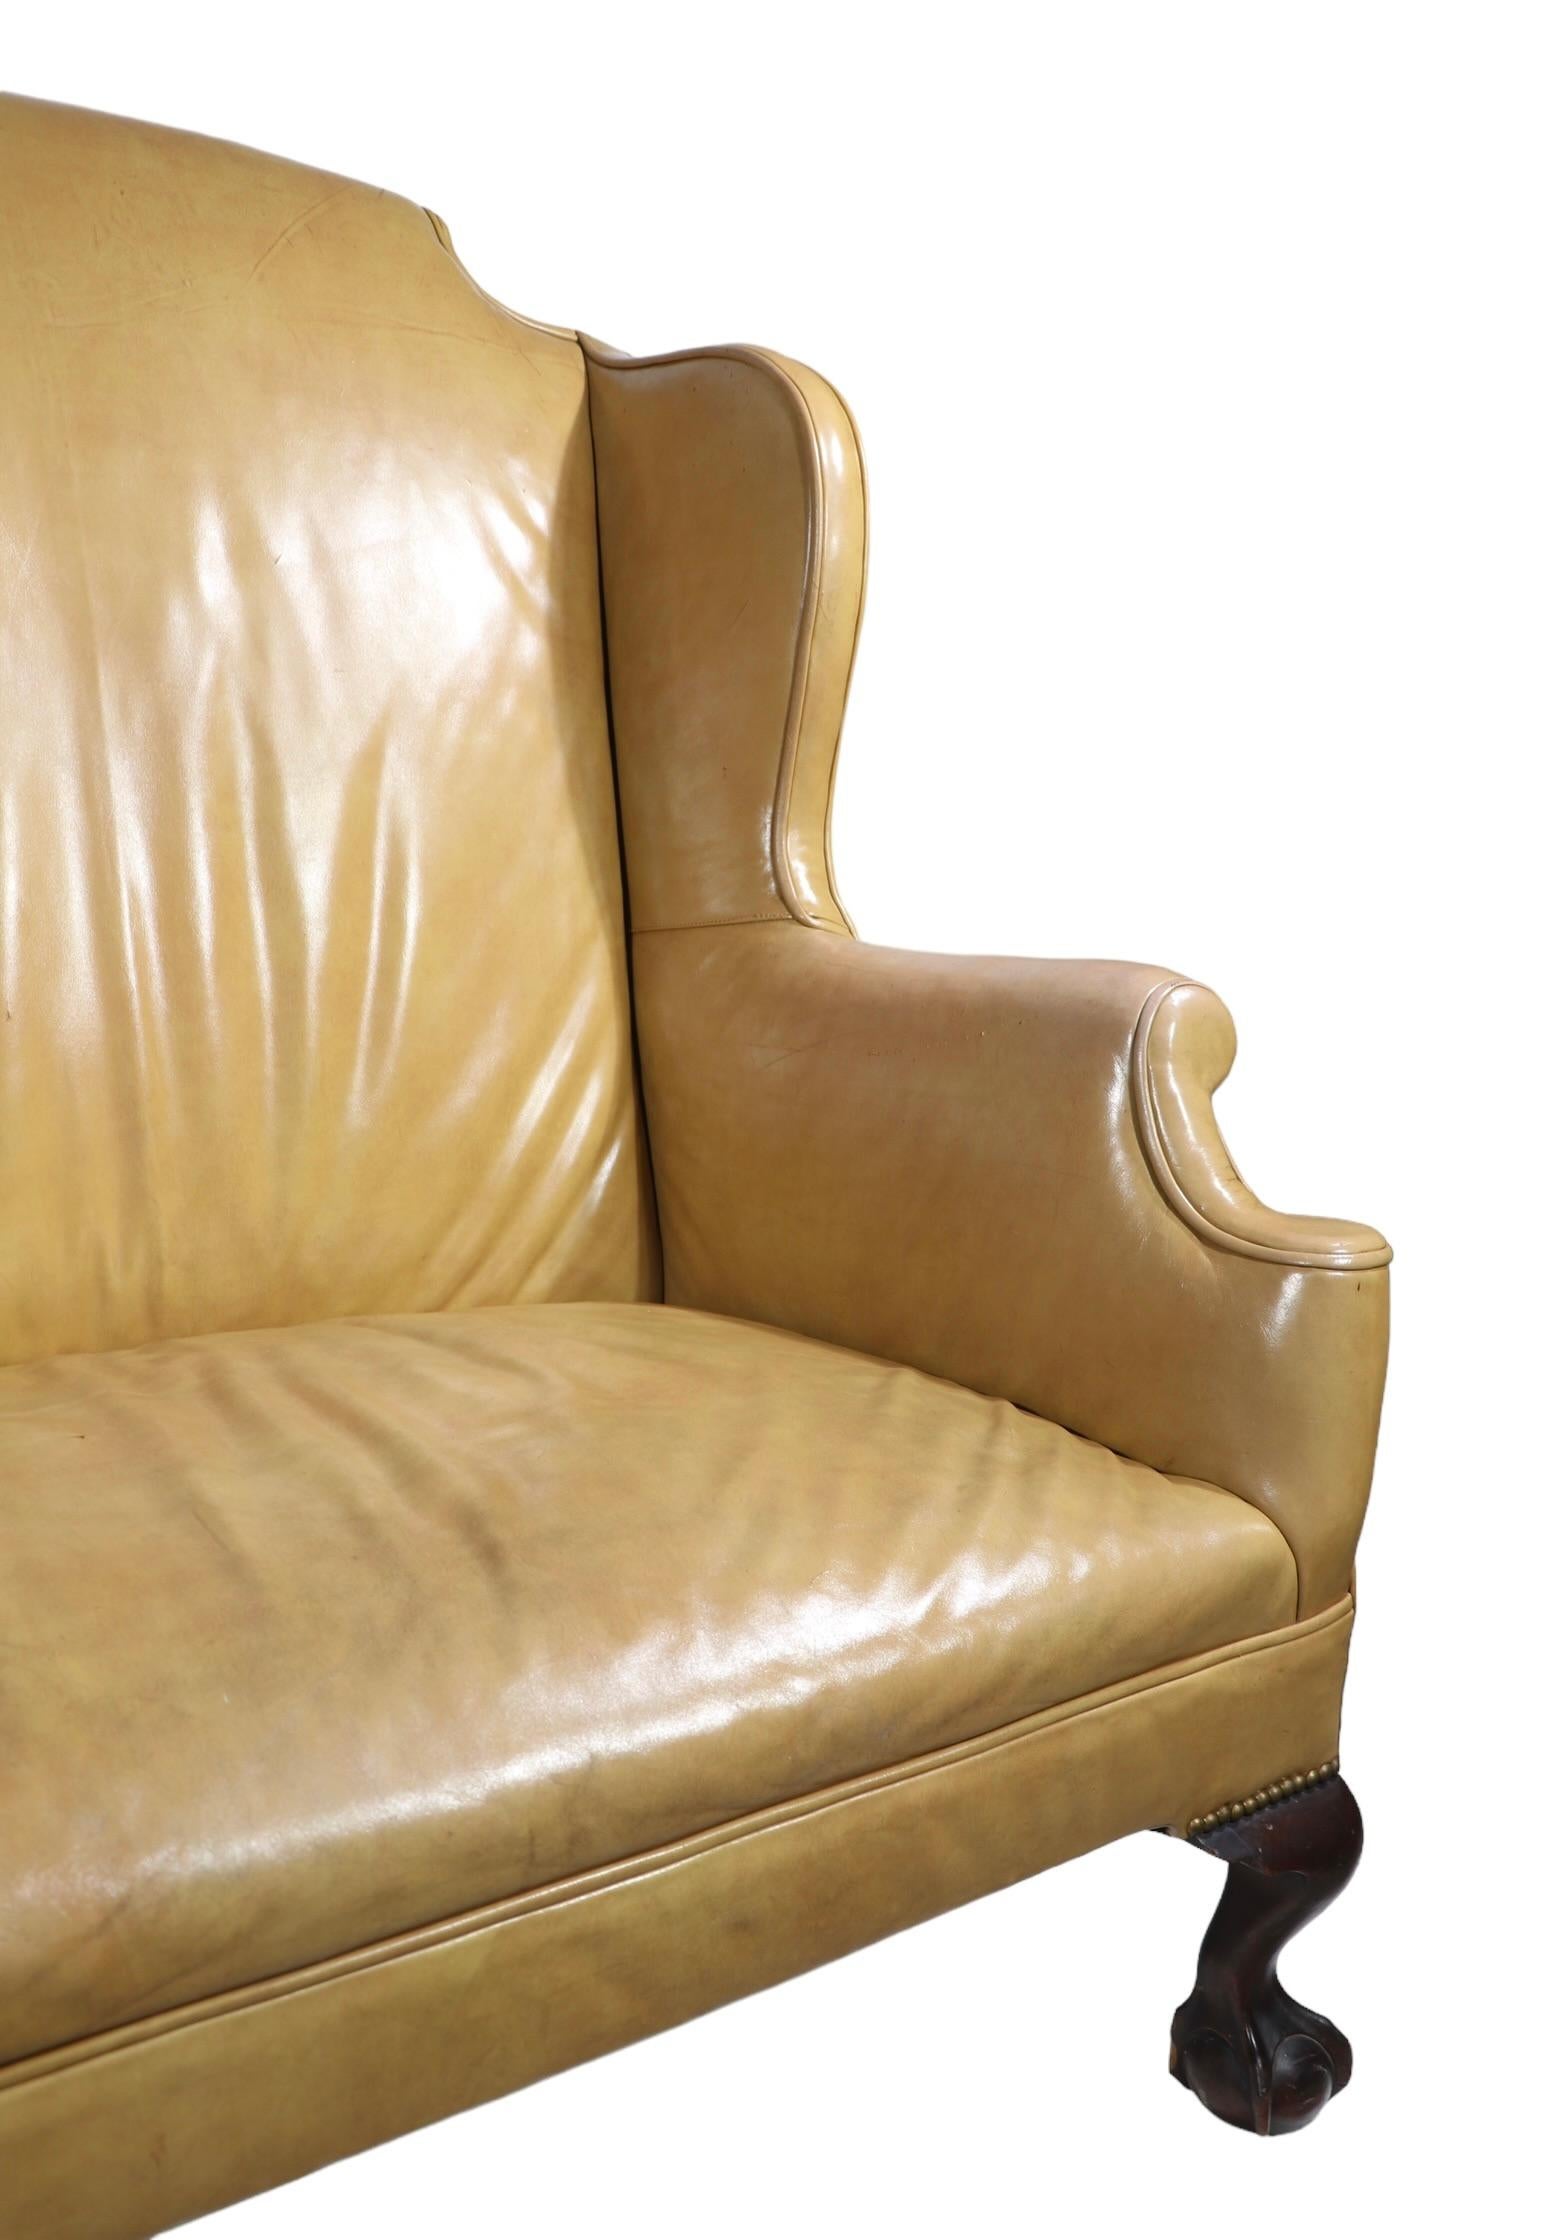 Chippendale Style Leather Loveseat from Ft. William Henry Hotel Lake George N.Y. For Sale 15